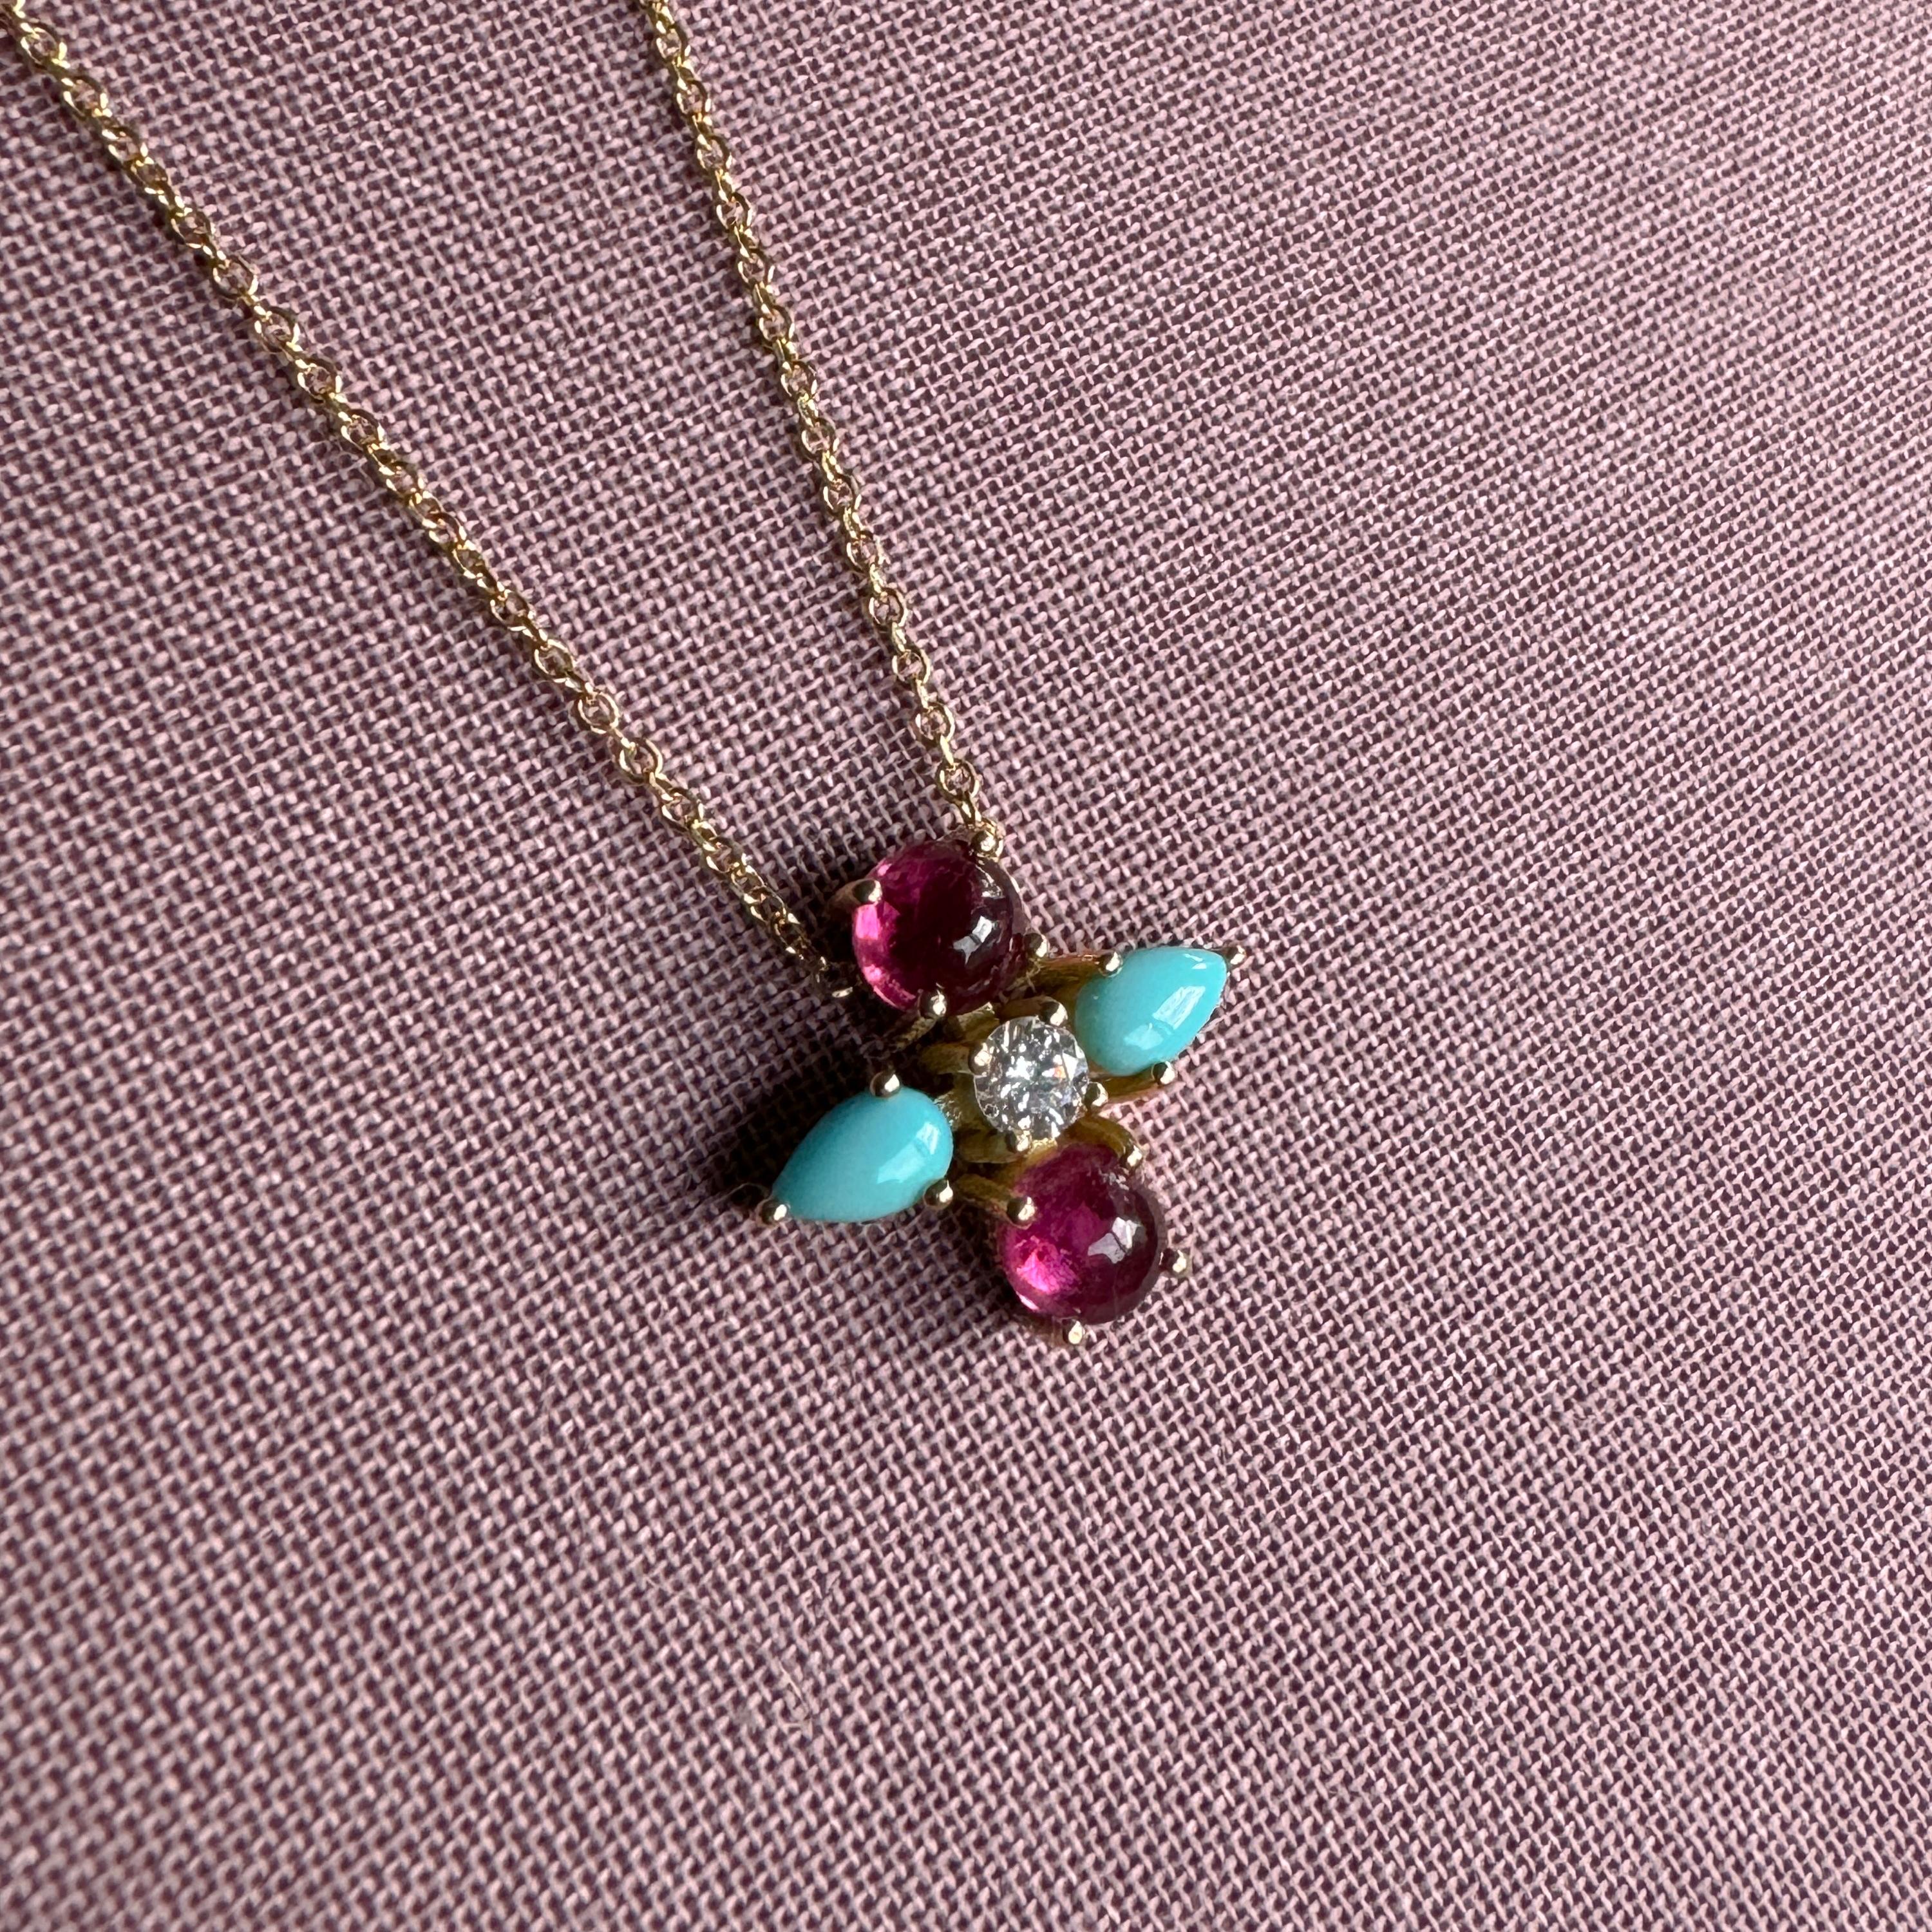 Marquise Cut Pendant in 18 Karat Yellow Gold With A Diamond, Pink Tourmaline, Turquoise For Sale